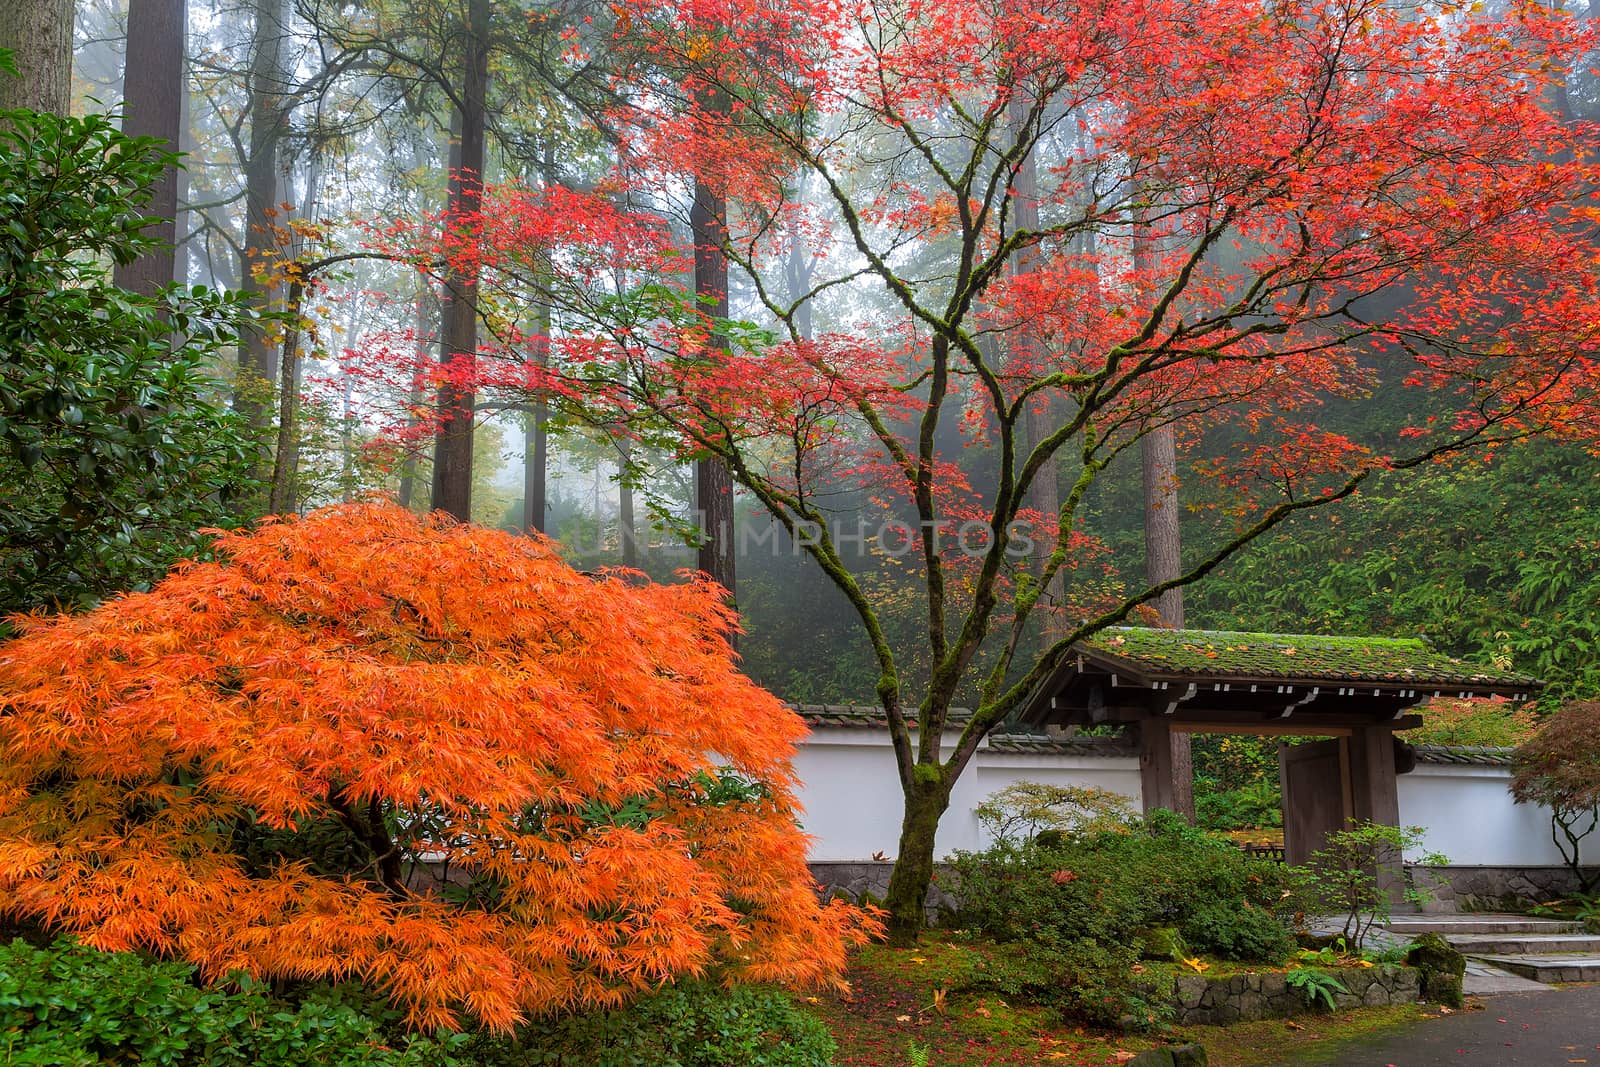 Gateway to Portland Japanes Garden in the Fall of 2014